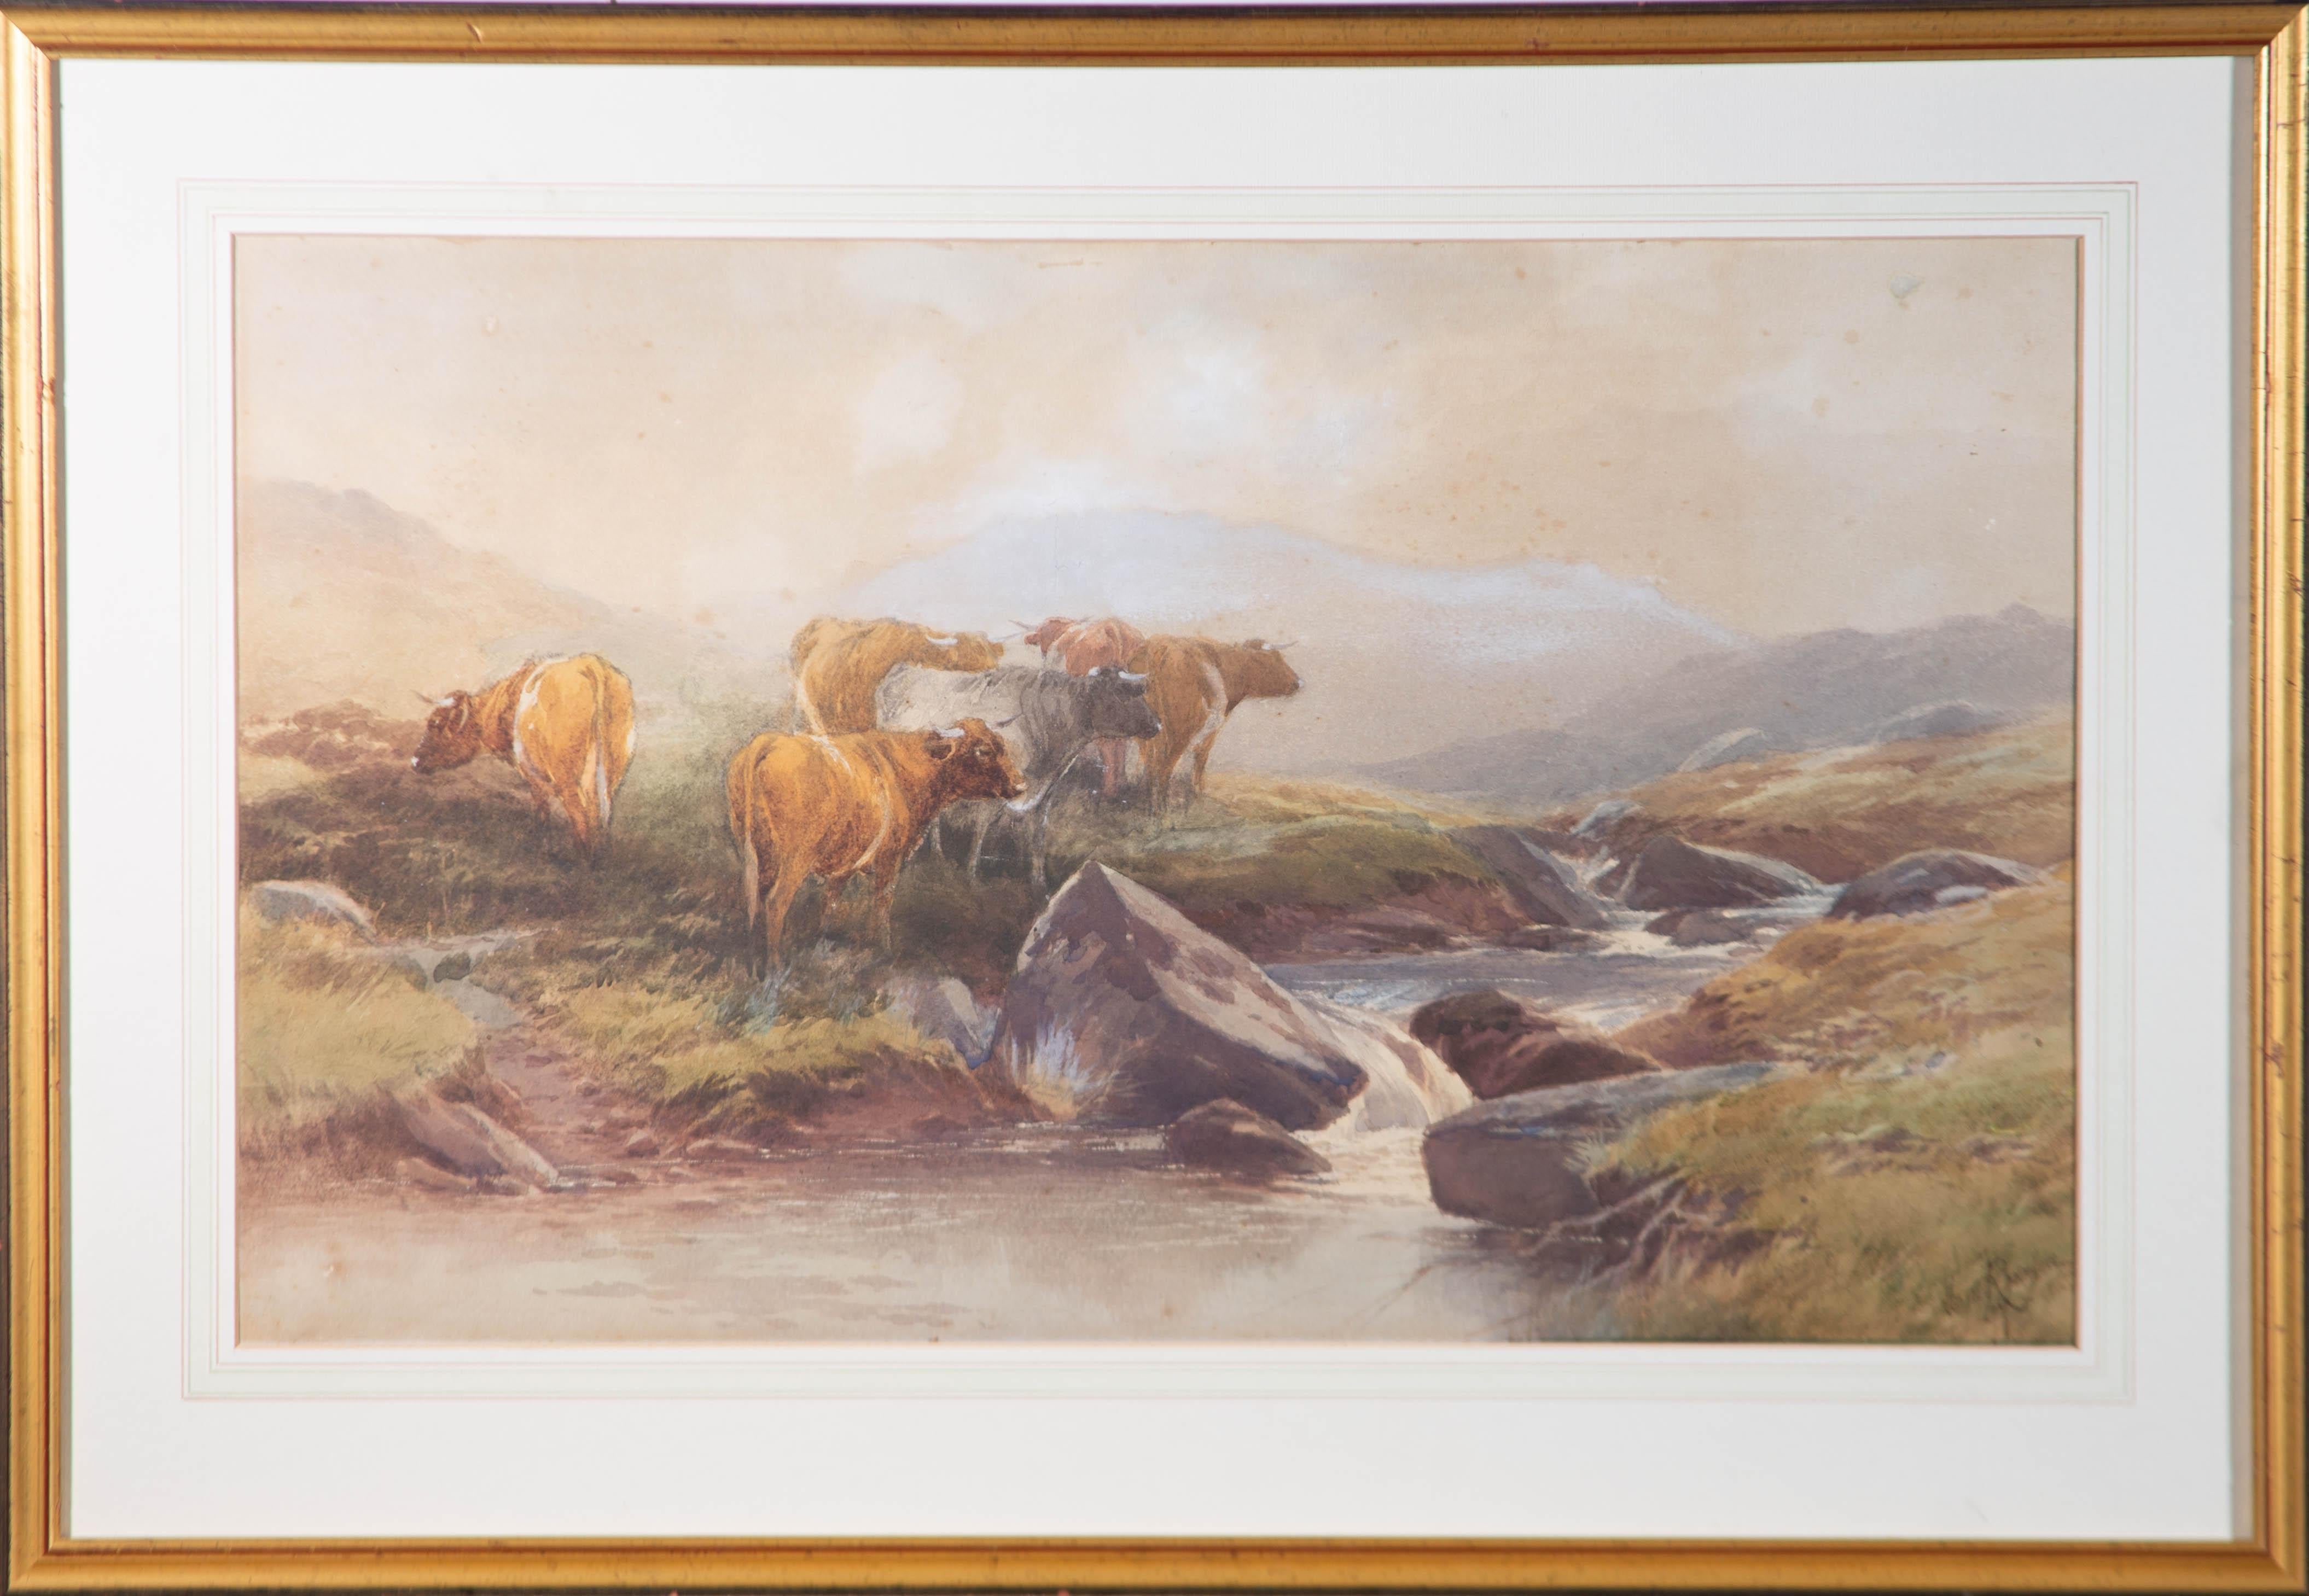 Unknown Landscape Art - Thomas Rowden (1842-1926) - 1897 Watercolour, Cattle Graze By A Mountain Spring